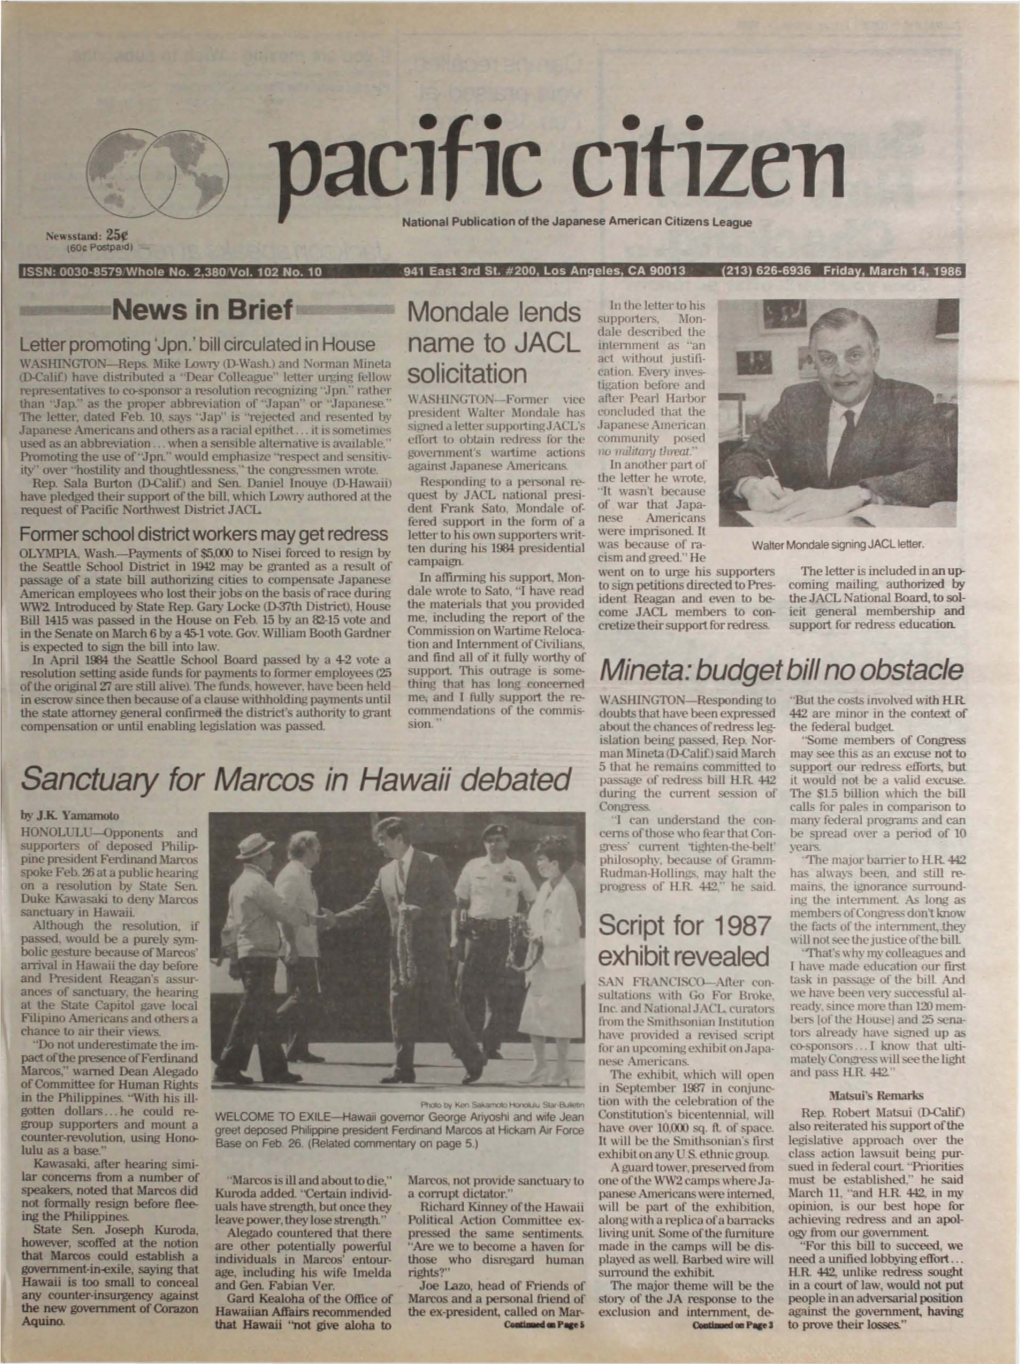 Acl Lc Cl Lzen National Publication of the Japanese American Citizens League Newsstand: 25¢ T60e Postpaid)